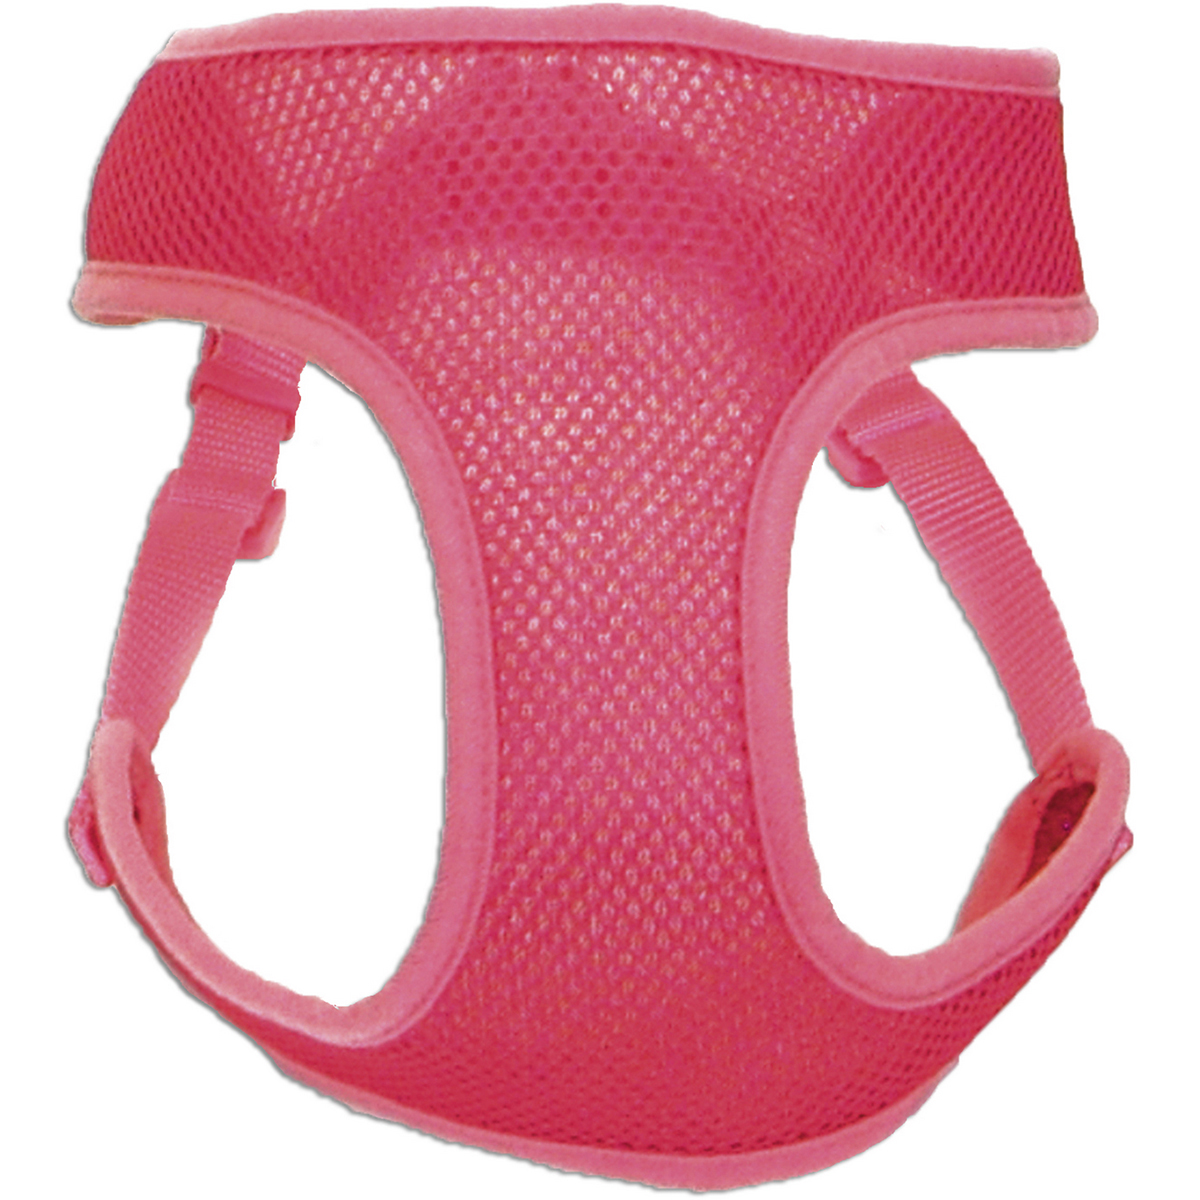 Picture of Coastal Pet Products 06683-PKBSM 19 - 23 in. Comfort Soft Wrap Adjustable Dog Harness - Small, Pink